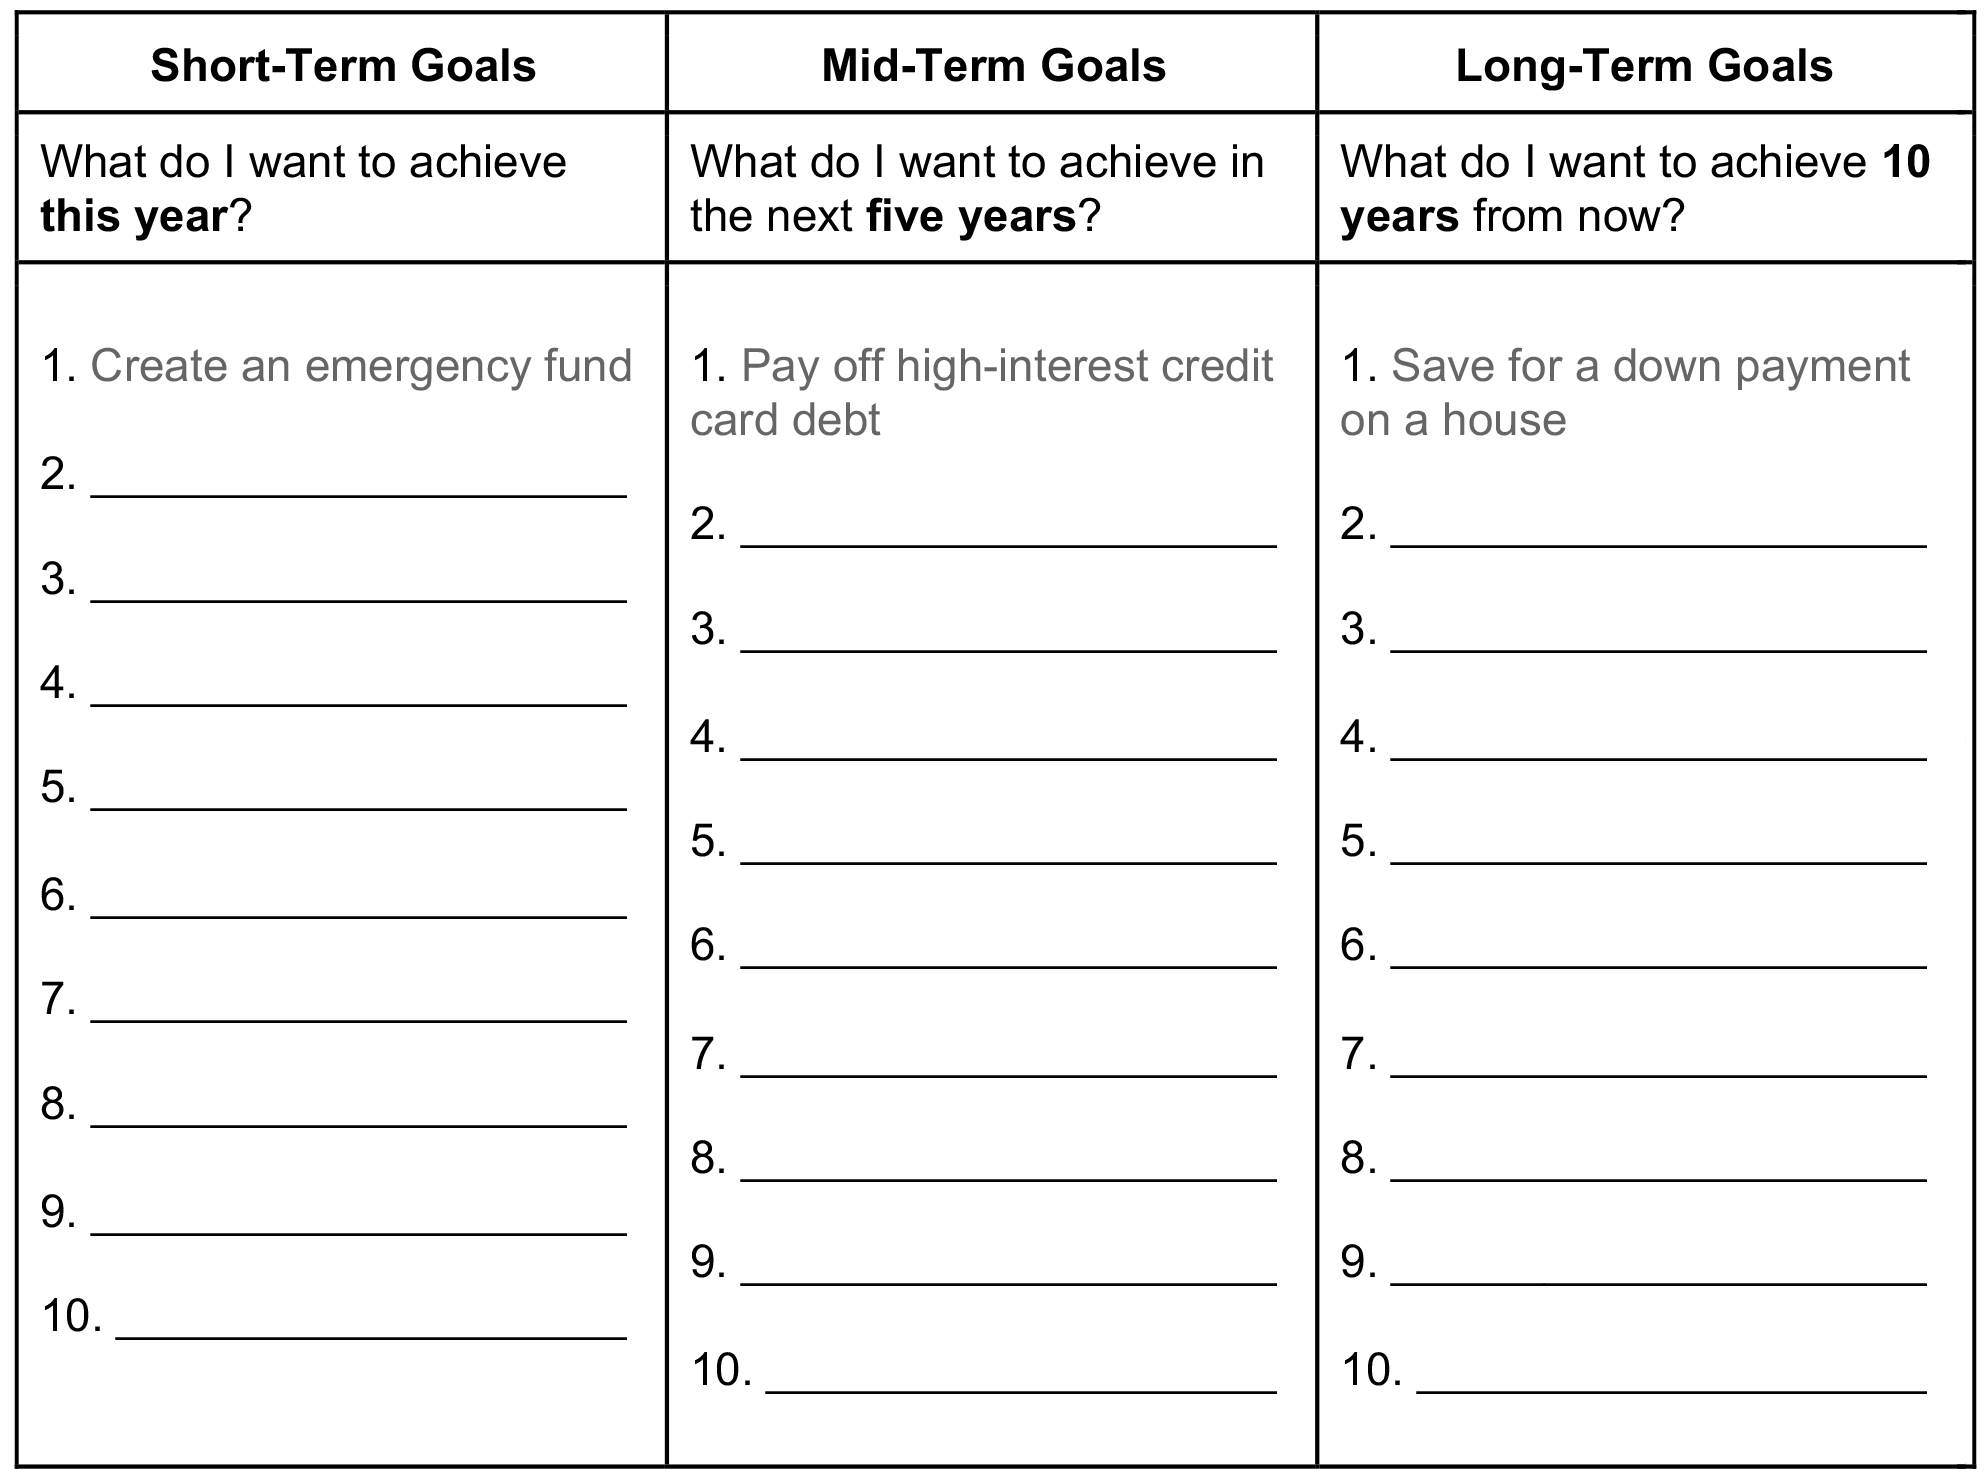 An example worksheet of short-term, mid-term, and long-term goals